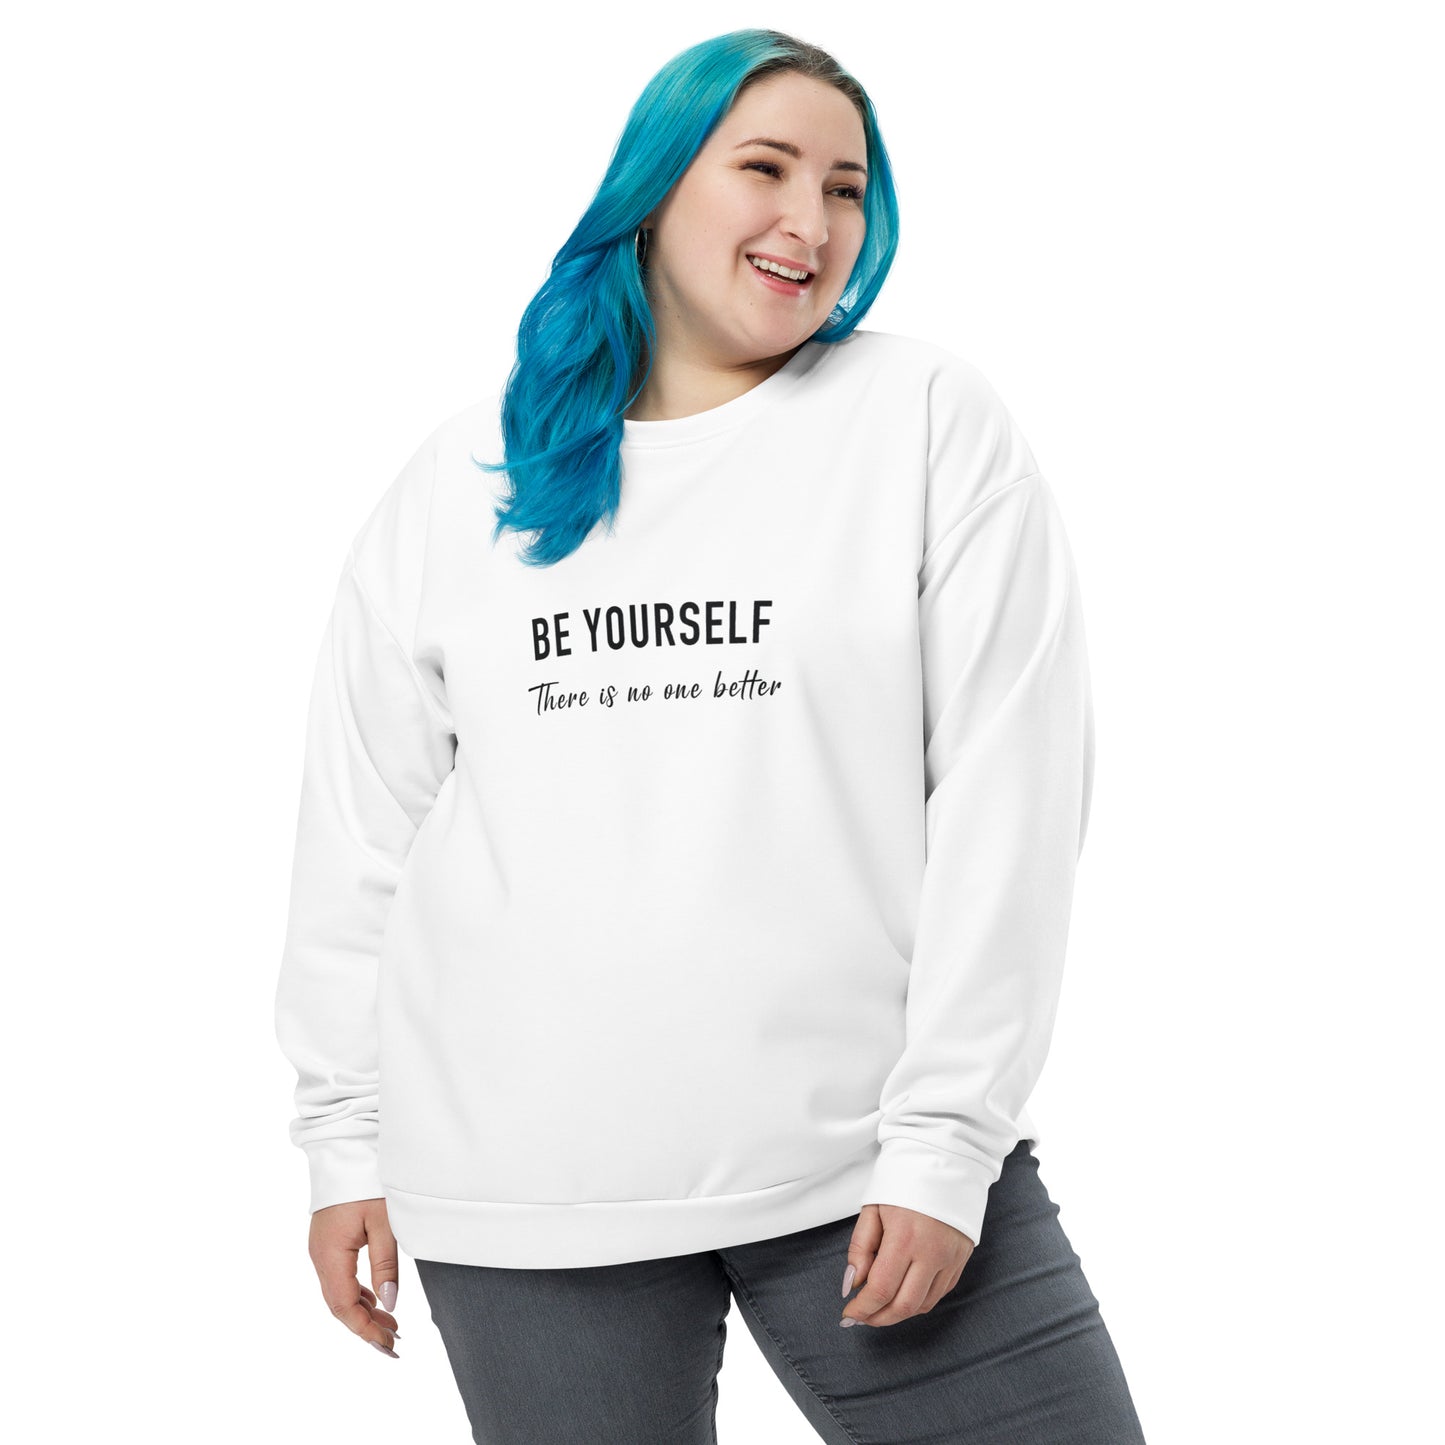 Be Yourself, There Is No One Better Recycled Sweatshirt